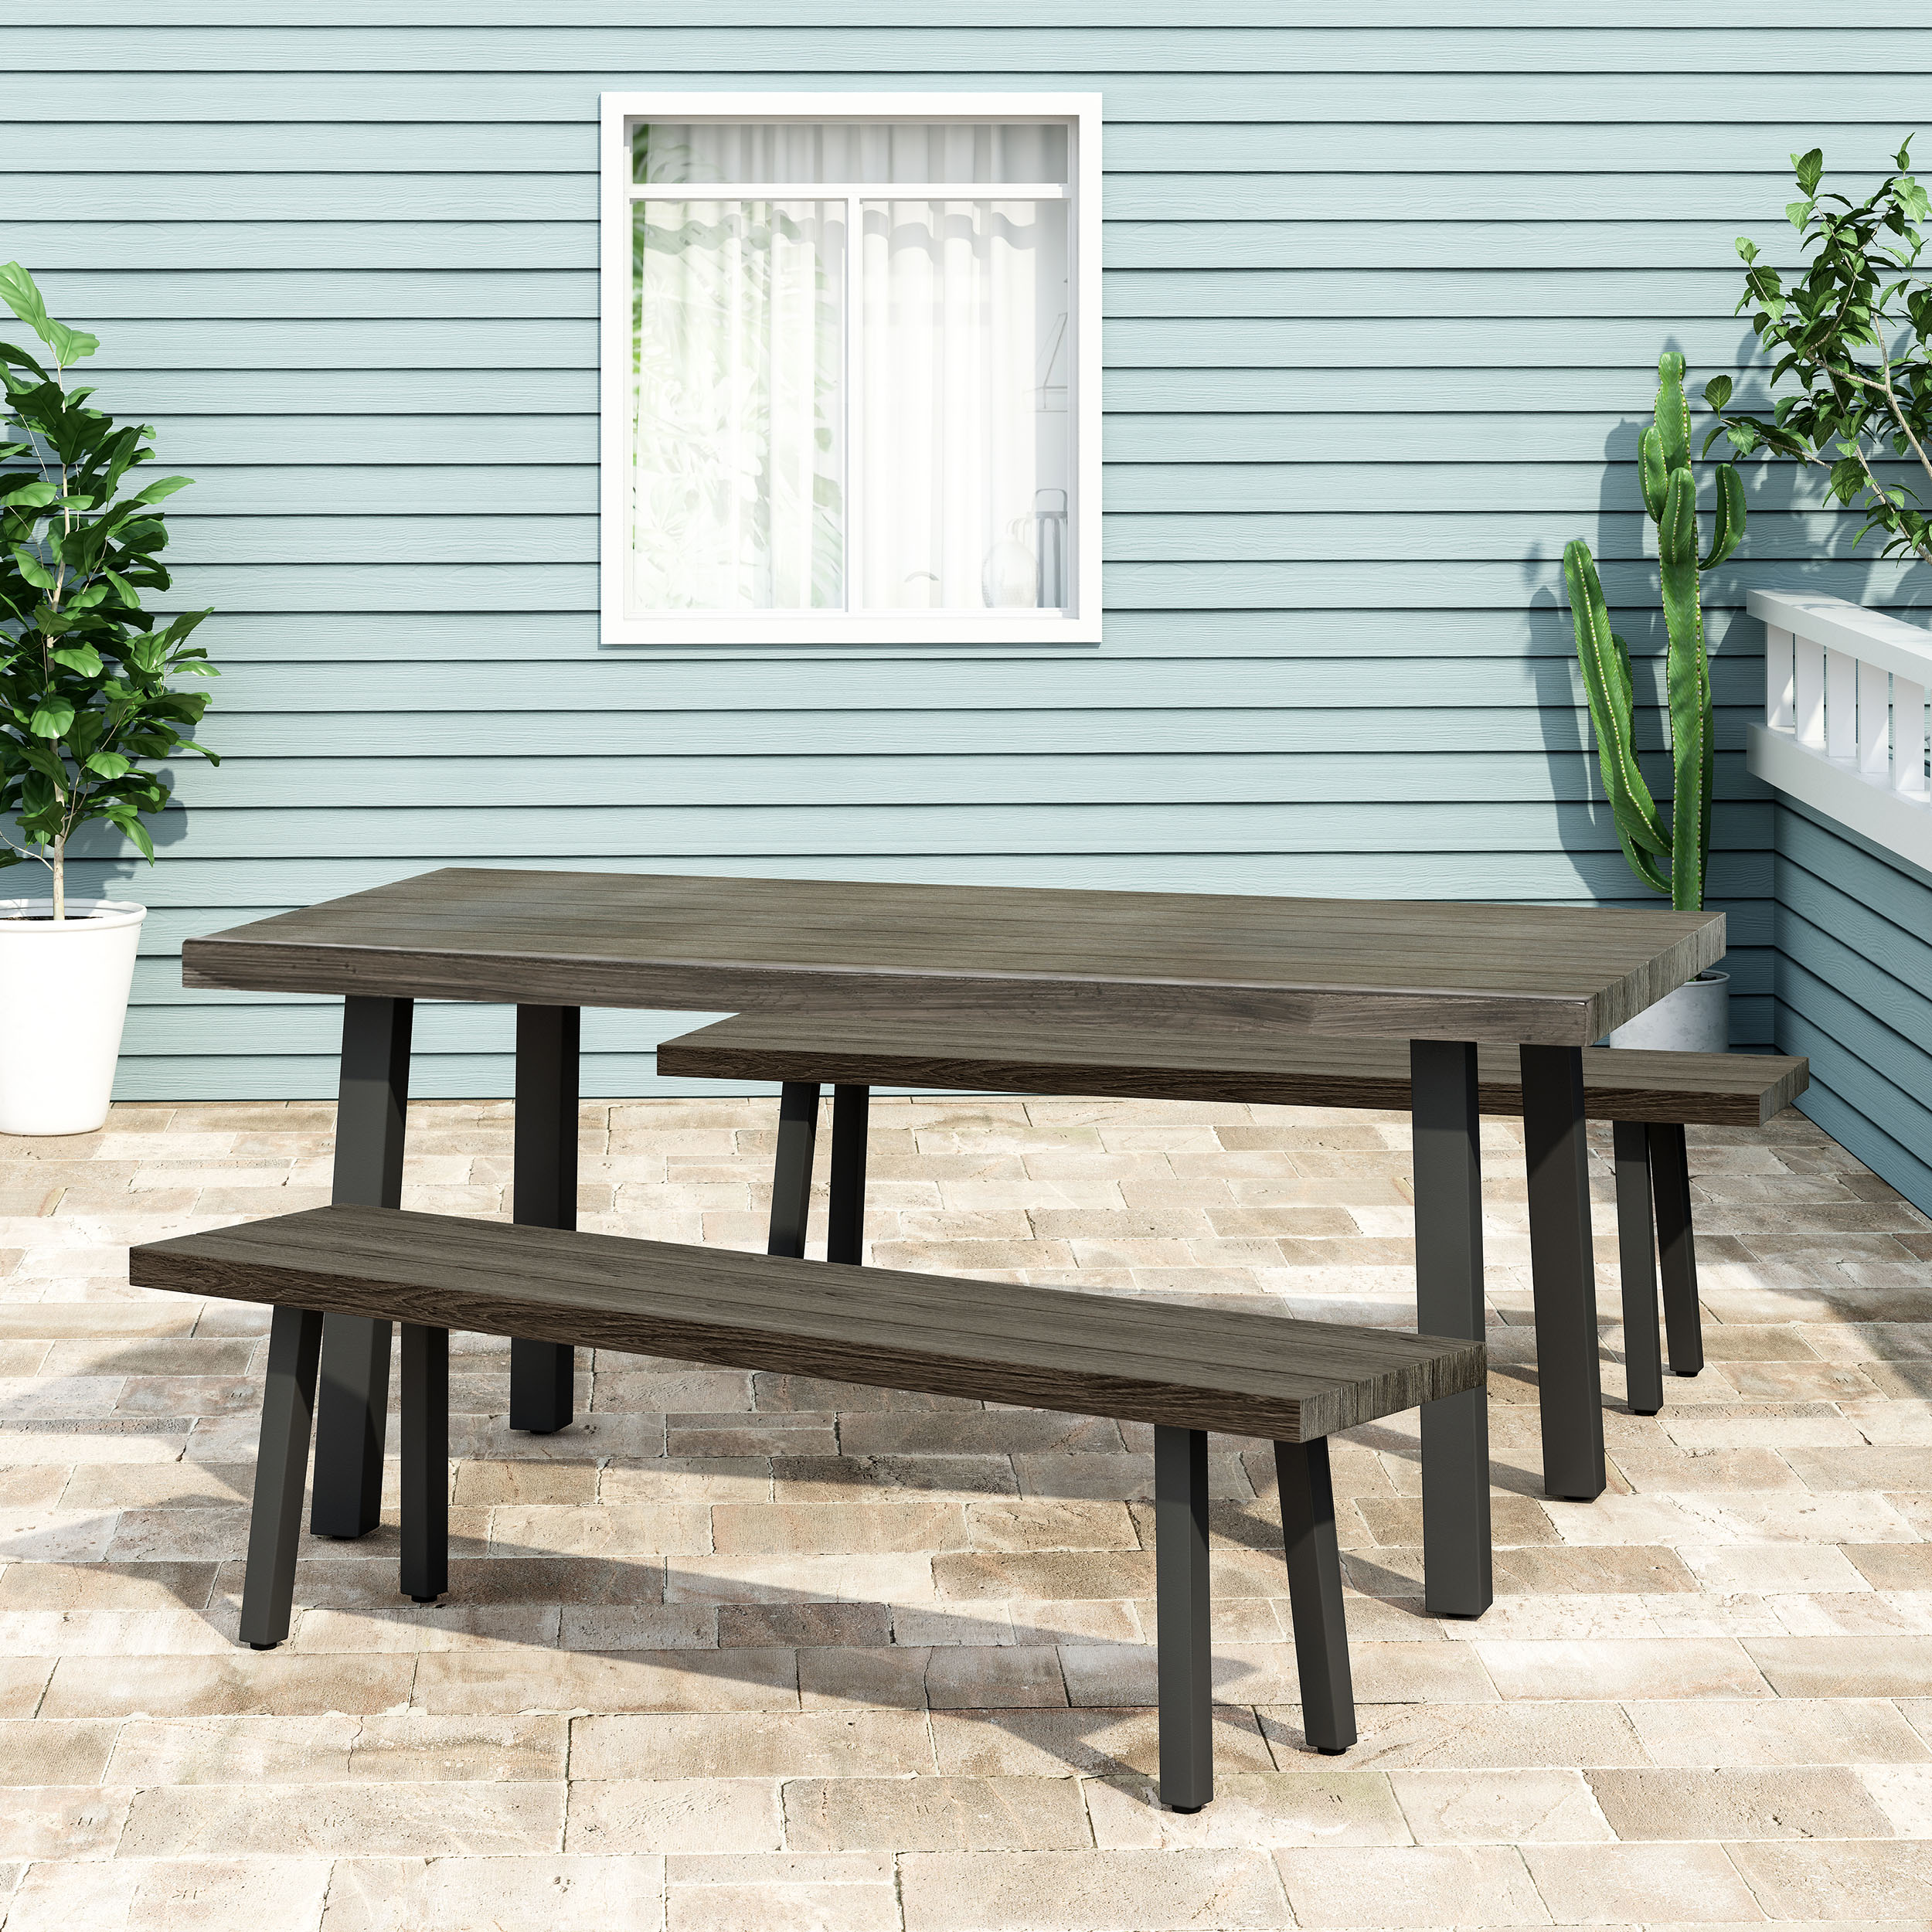 GDF Studio Altair Outdoor Modern Industrial 3 Piece Aluminum Dining Set with Benches, Gray and Matte Black - image 3 of 13